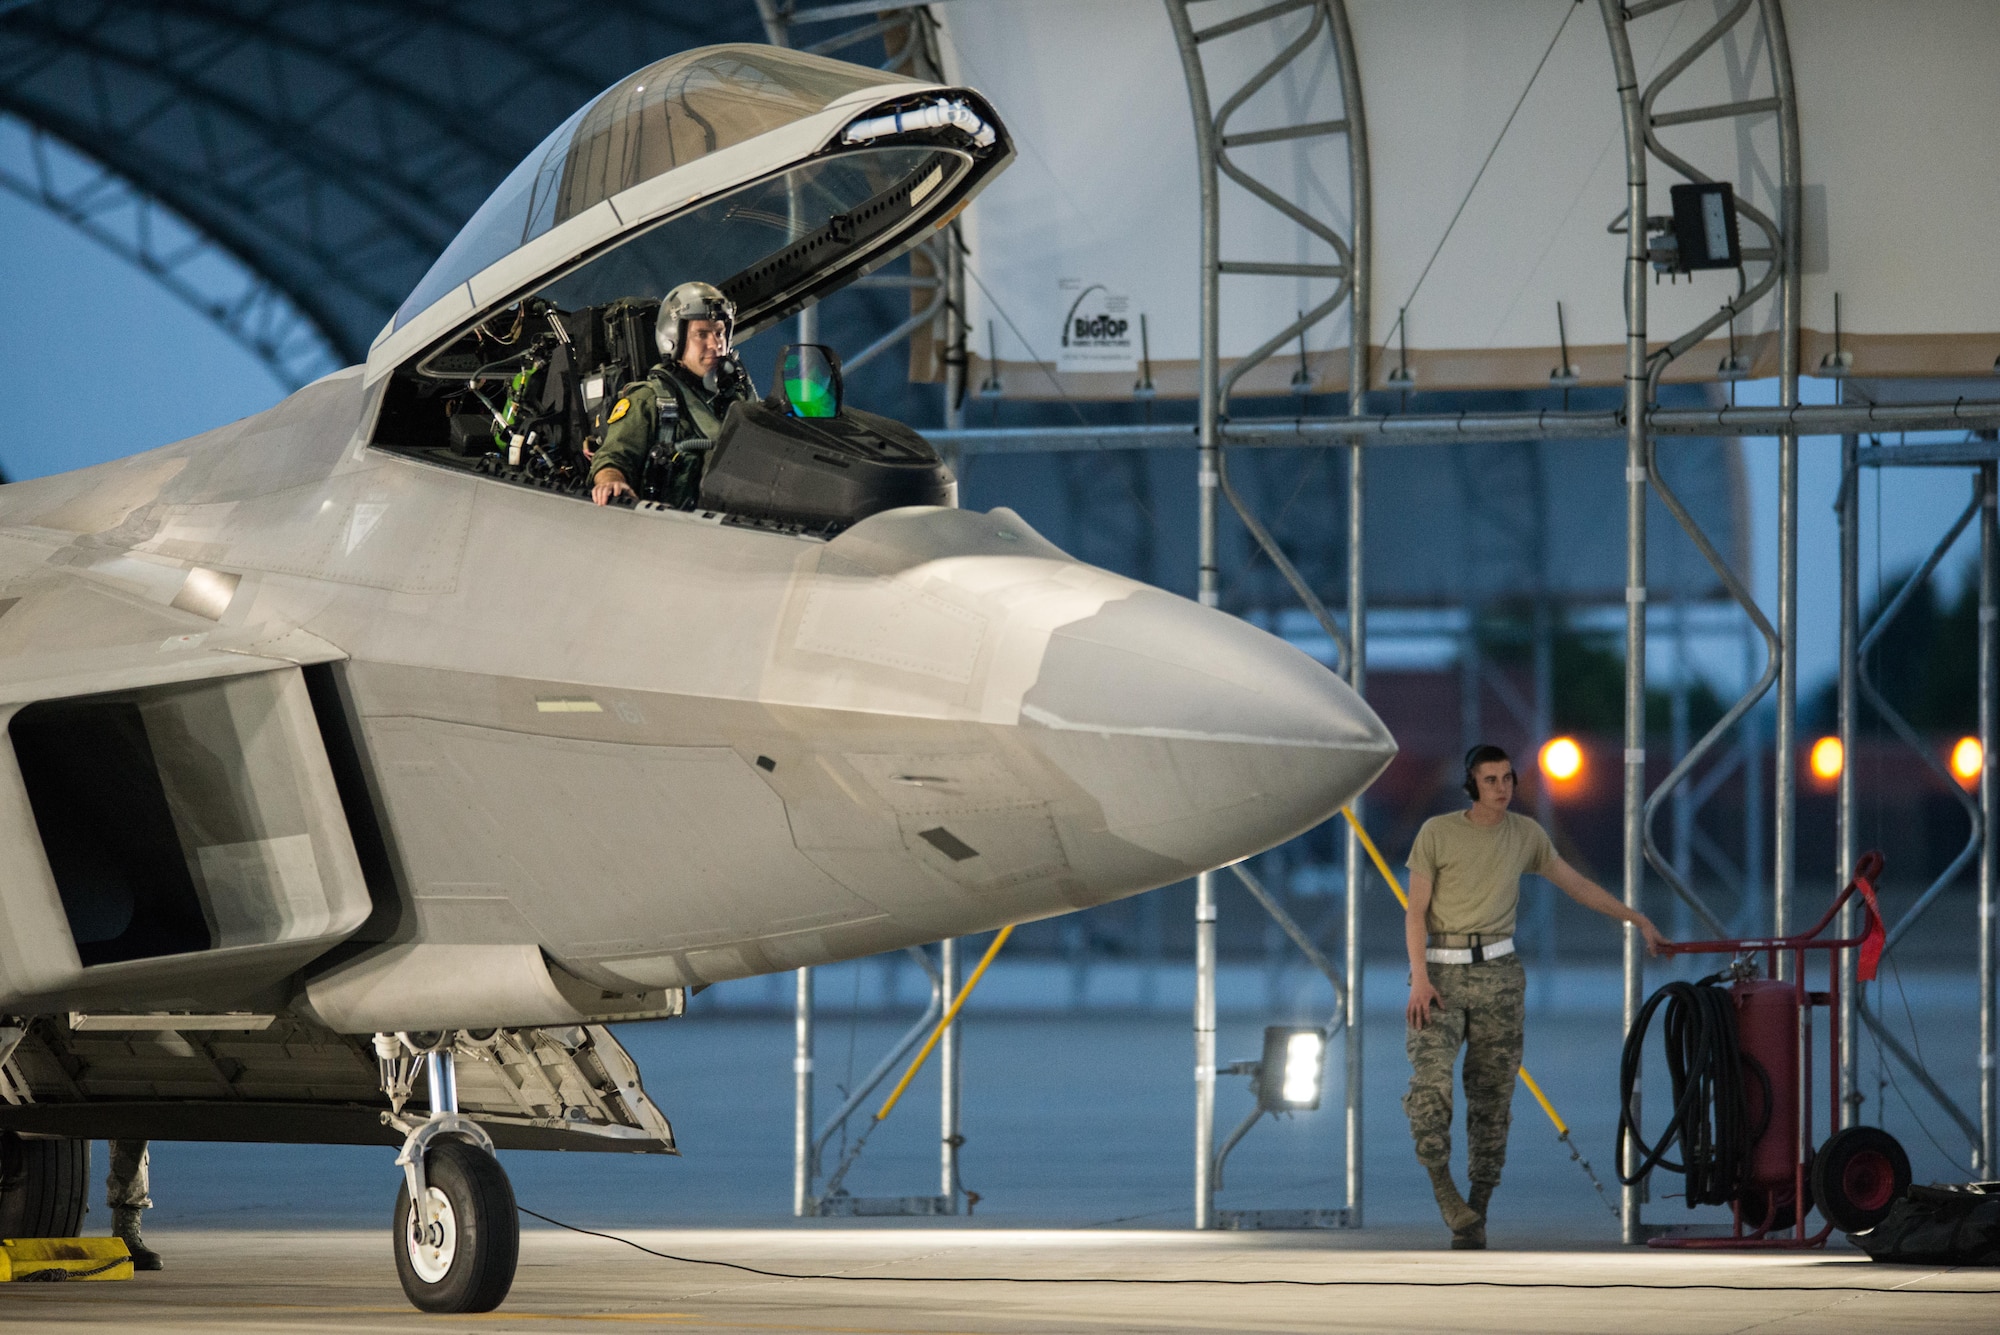 A 1st Fighter Wing F-22 pilot and maintenance Airman prepare to launch a jet for take off at Joint Base Langley-Eustis, Va., July 11, 2017. The wing conducted night flying training missions to keep pilots current on skills needed to operate in the dark. (U.S. Air Force Photo/Master Sgt. Benjamin Wilson)